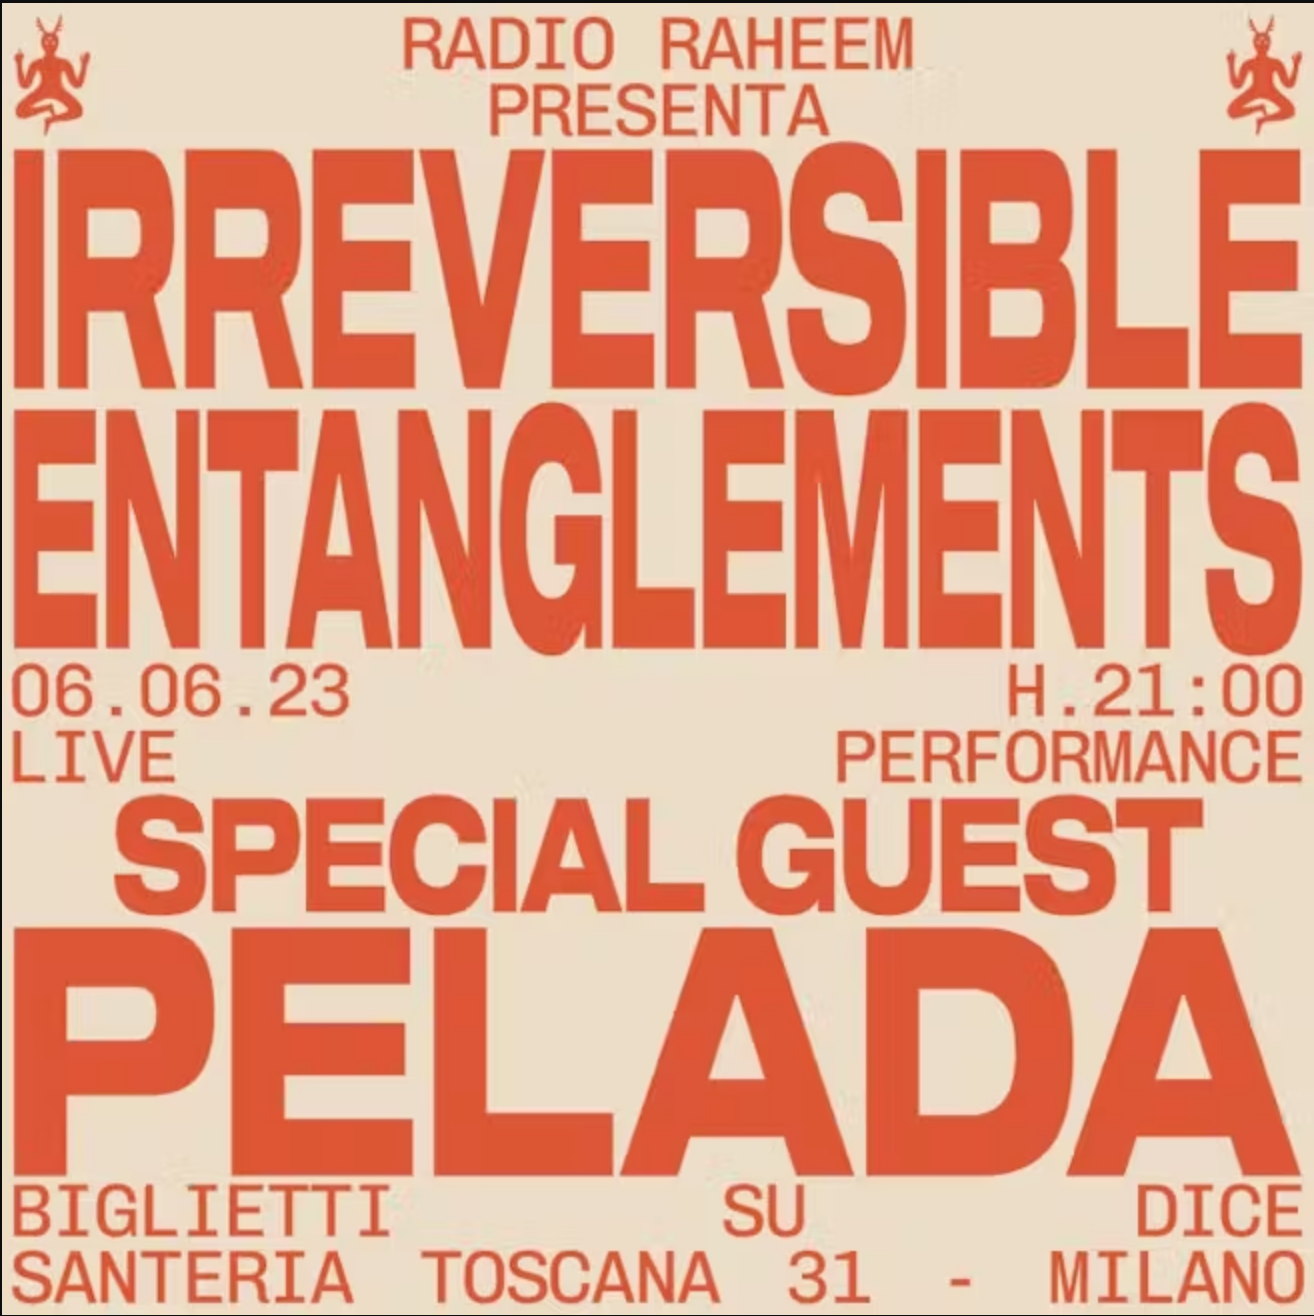 Irreversible Entanglements w/ special guest Pelada - フライヤー表